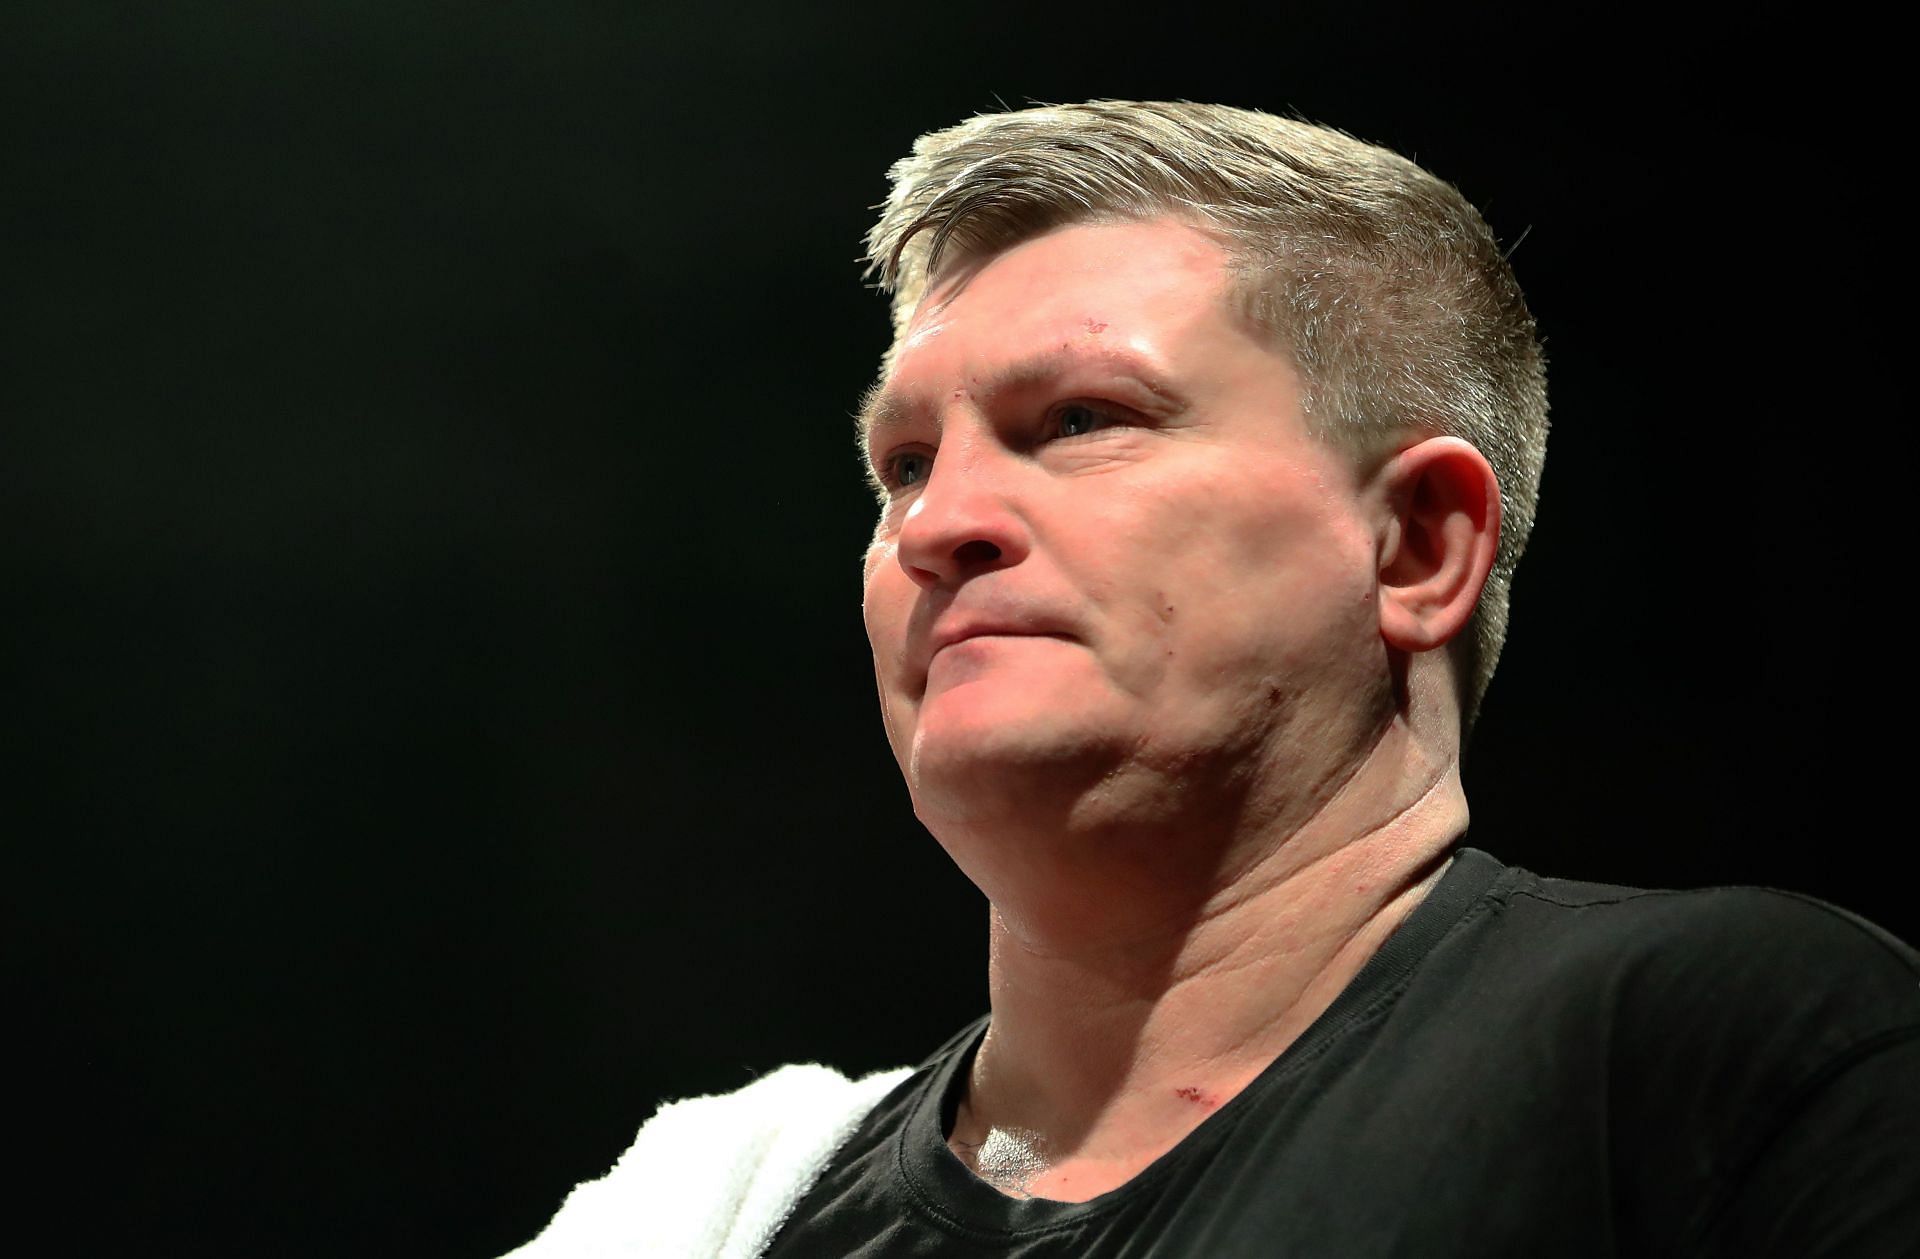 Boxing News: "He was suicidal" - Ricky Hatton reveals how he got back into boxing shape